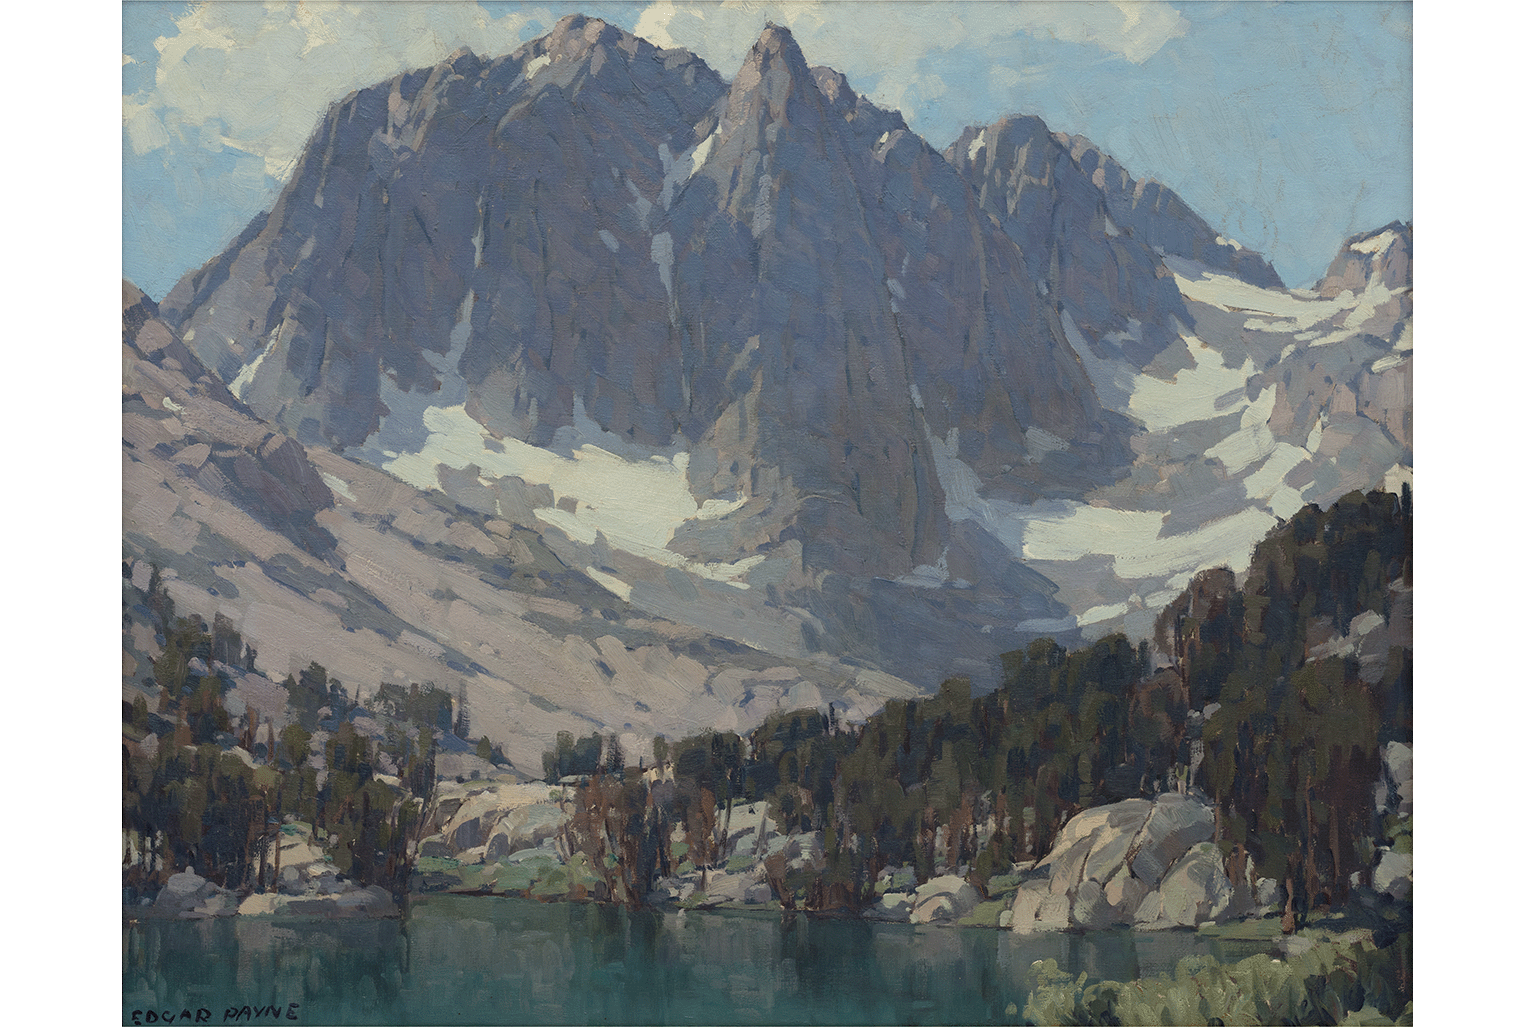 Edgar Payne, Temple Crag, circa 1920, Oil on canvas, 42 x 50 in. The Buck Collection at UCI Jack and Shanaz Langson Institute and Museum of California Art